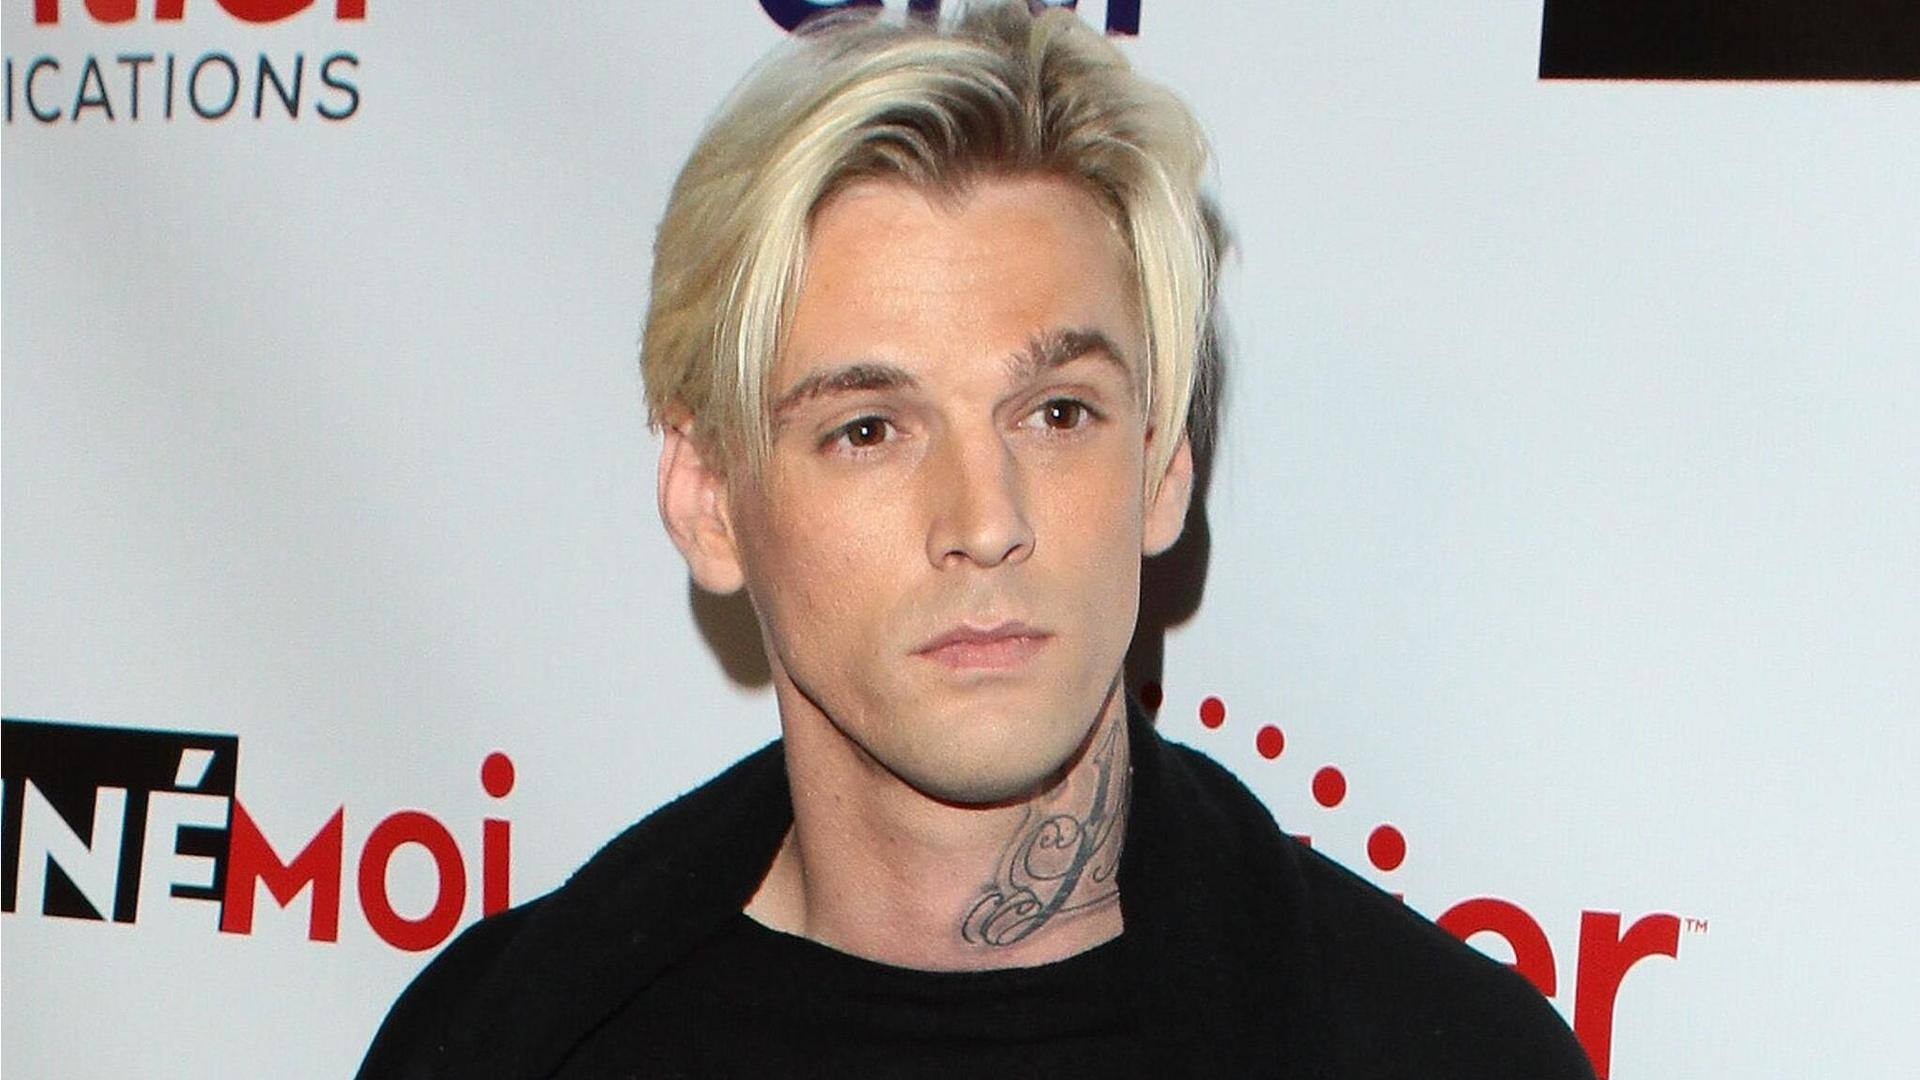 American singer Aaron Carter found dead in California residence